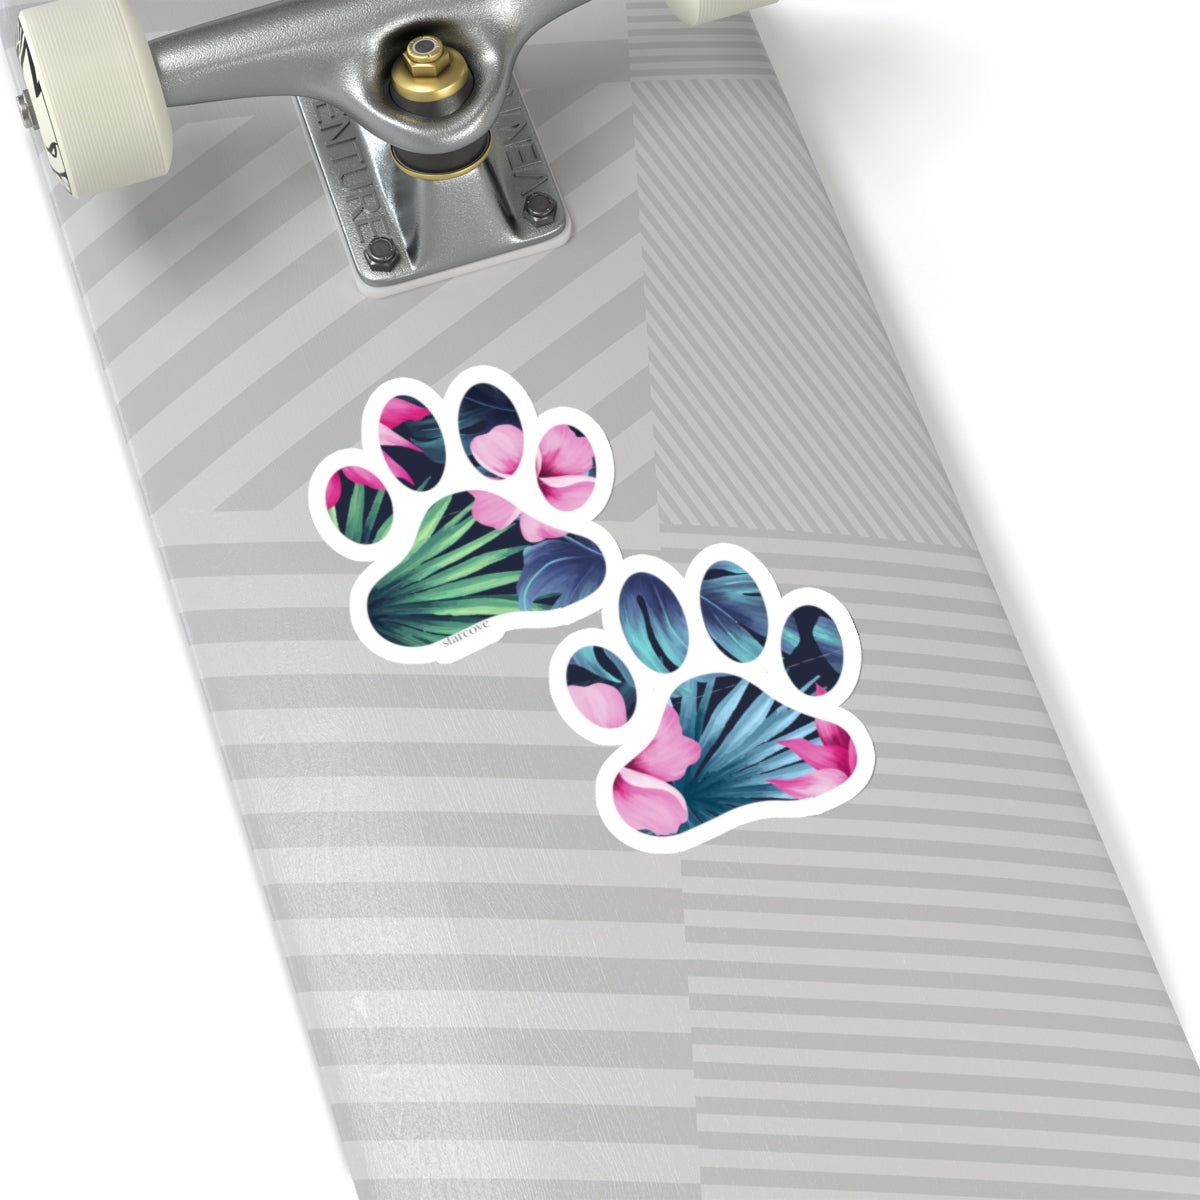 Tropical Dog Paw Print Sticker, Cute Floral Leafs Lover Decal Bumper Car Laptop I love Pets Mom Animal Vinyl  Laptop Gift Starcove Fashion